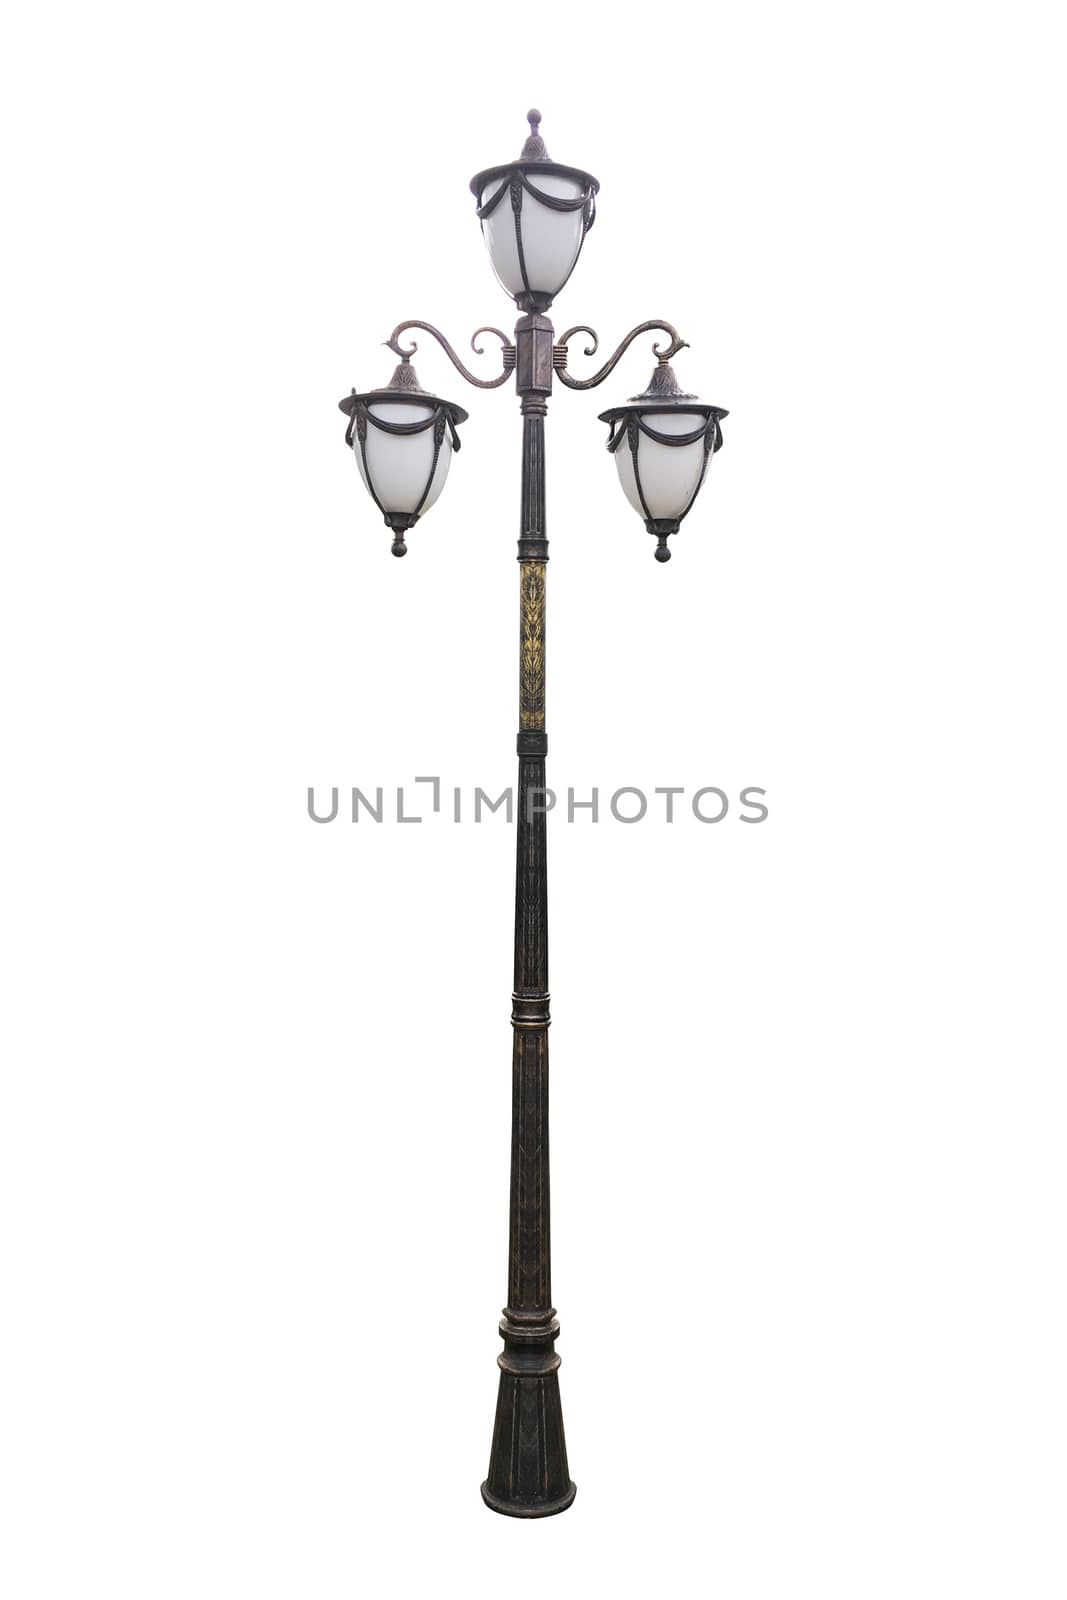 Street lamppost with clipping path isolate on white background